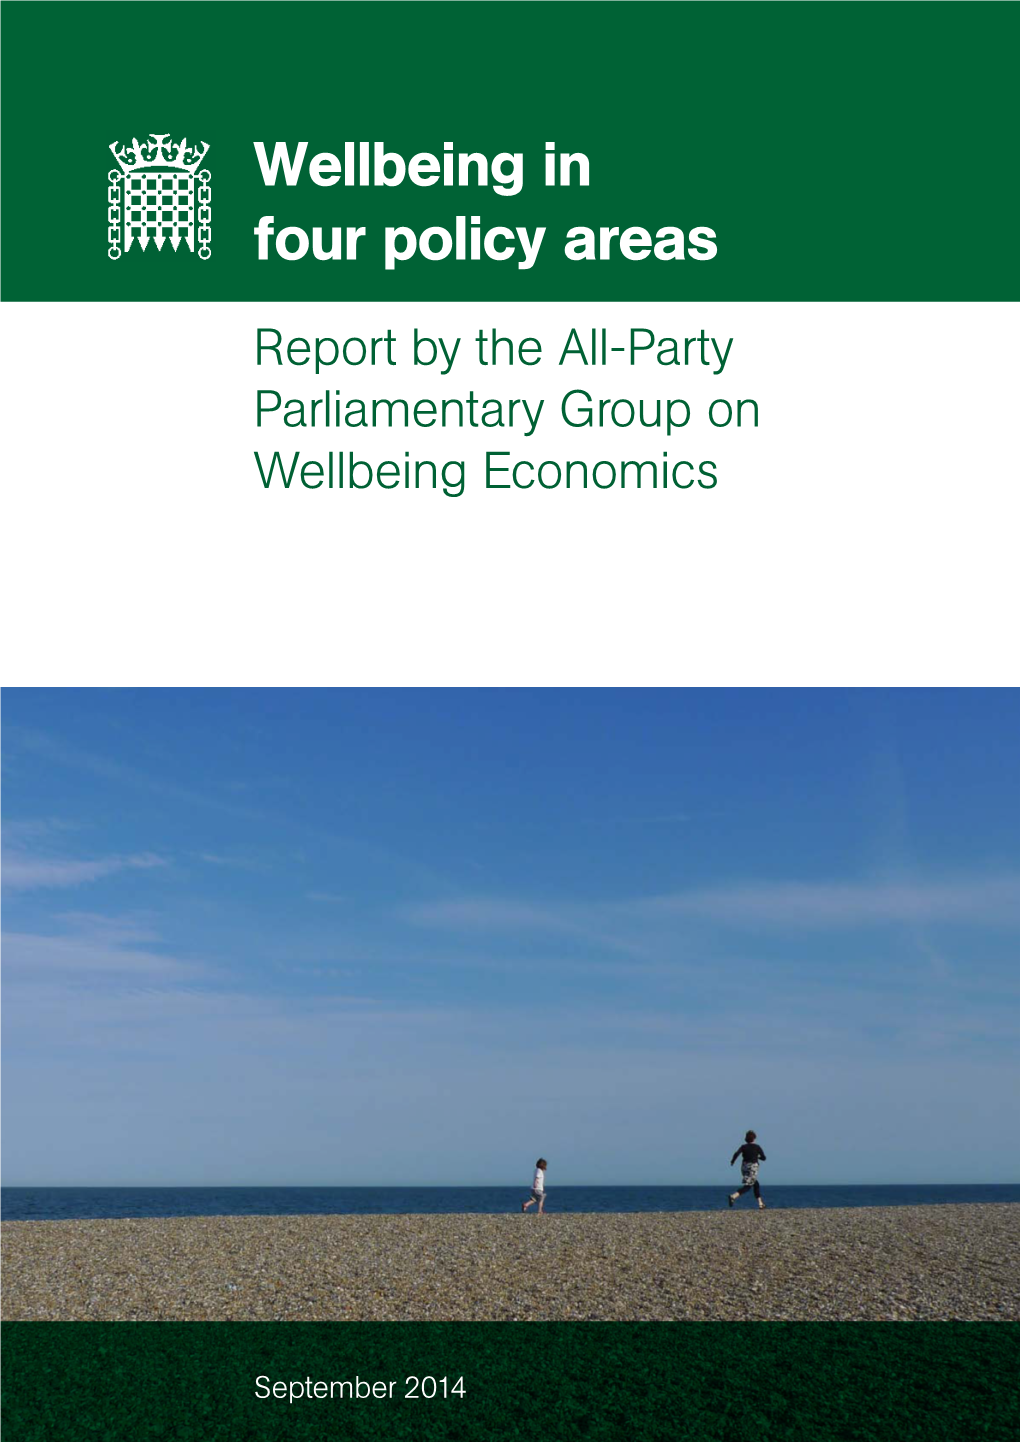 Wellbeing in Four Policy Areas